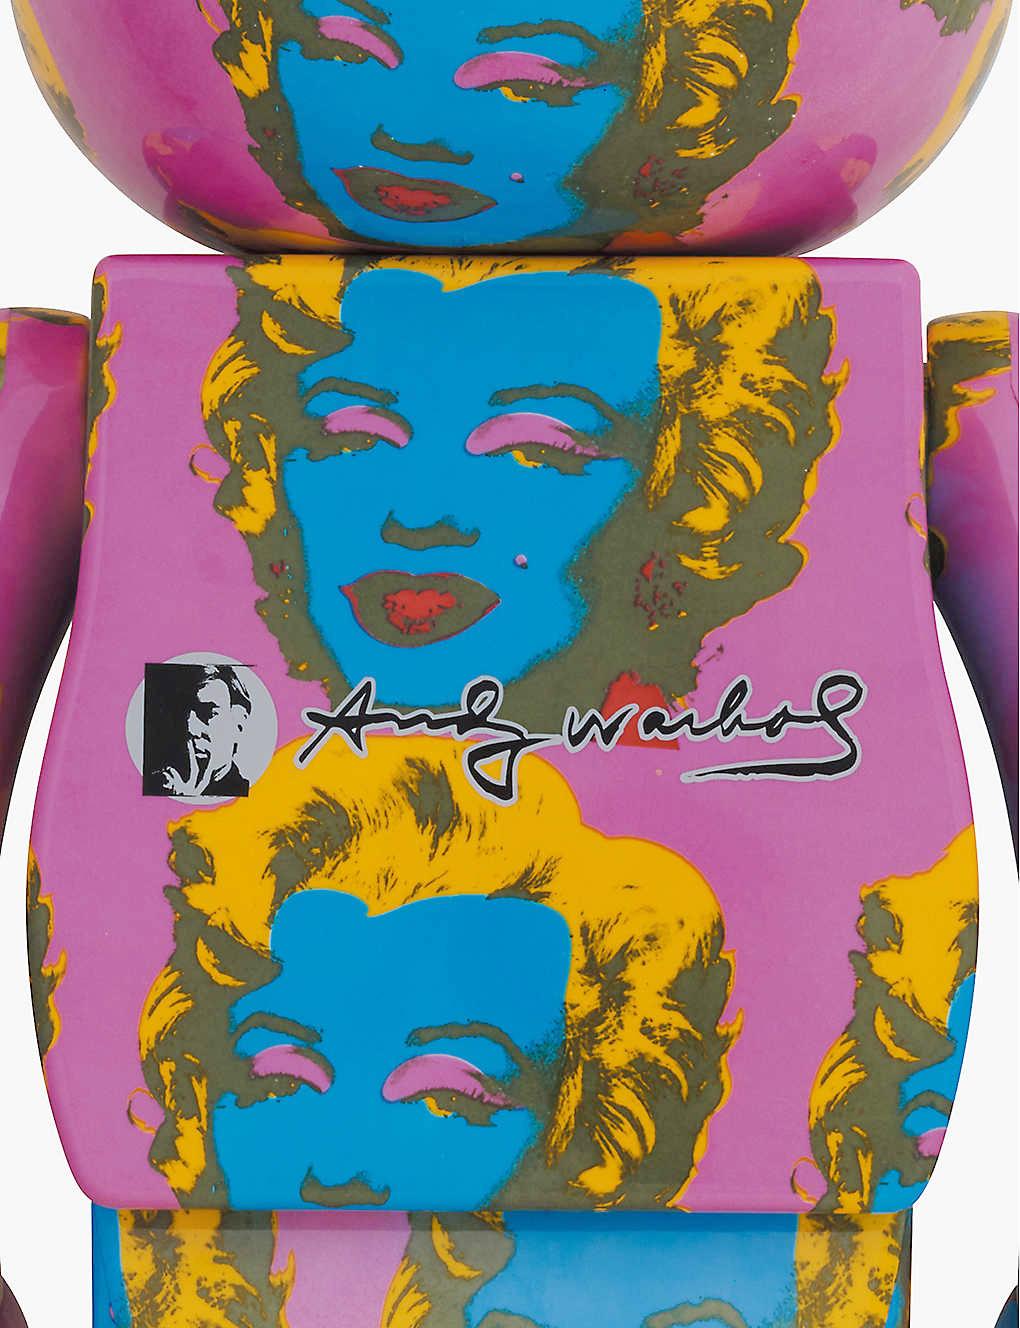 Andy Warhol Marilyn / Andy Warhil Flowers 400% Vinyl Figures: Set of two (2020-2021):
Andy Warhol Flowers & Marilyn collectibles trademarked & licensed by the Estate of Andy Warhol. The partnered collectibles reveal Andy Warhol's iconic 1960's